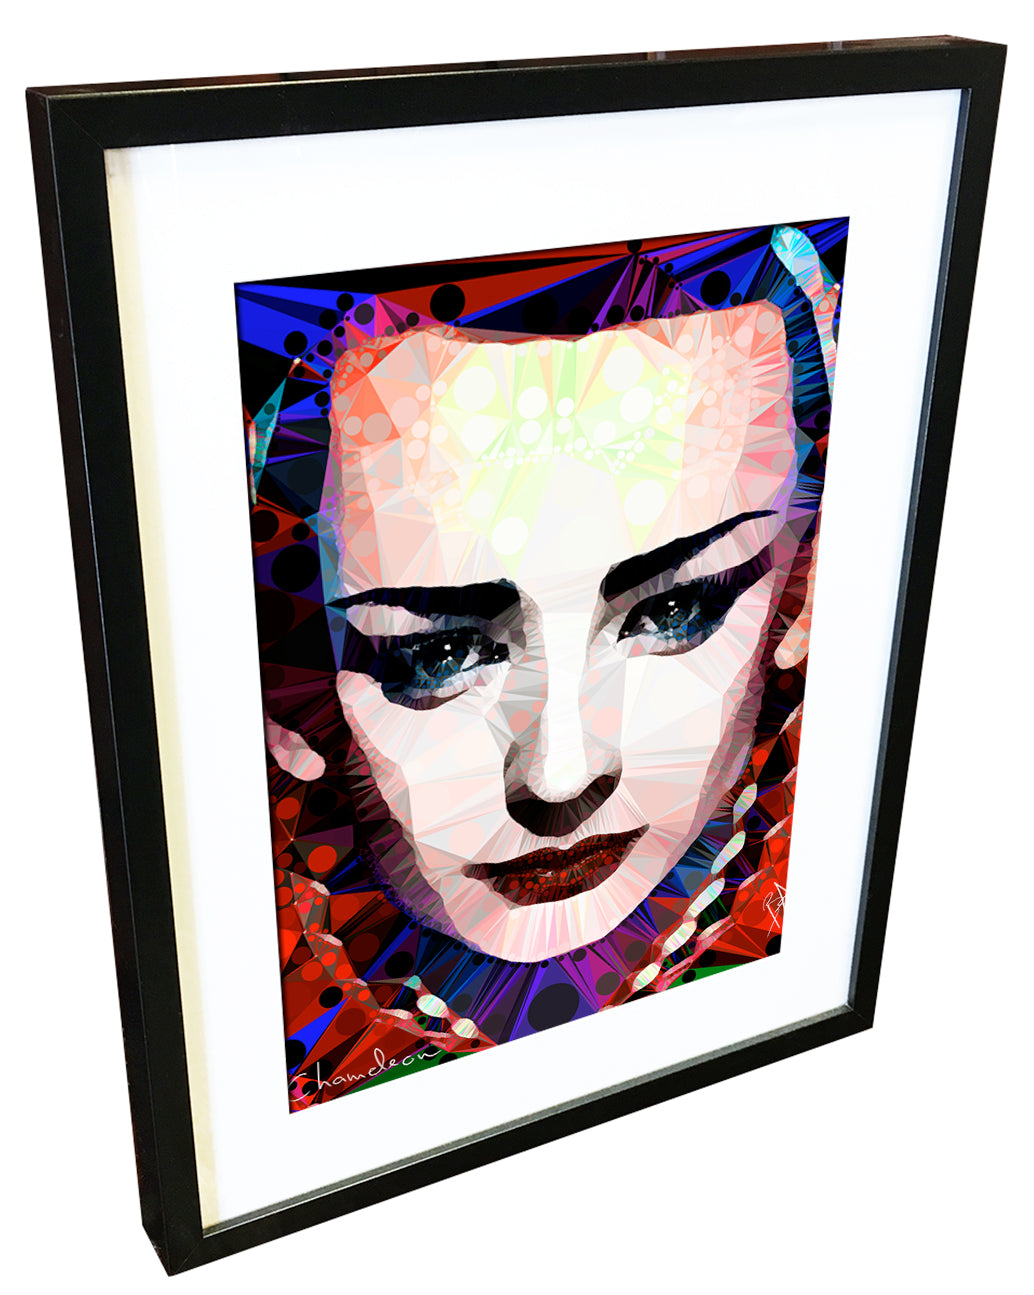 Boy George #2 by Baiba Auria - signed art print - Egoiste Gallery - Art Gallery in Manchester City Centre